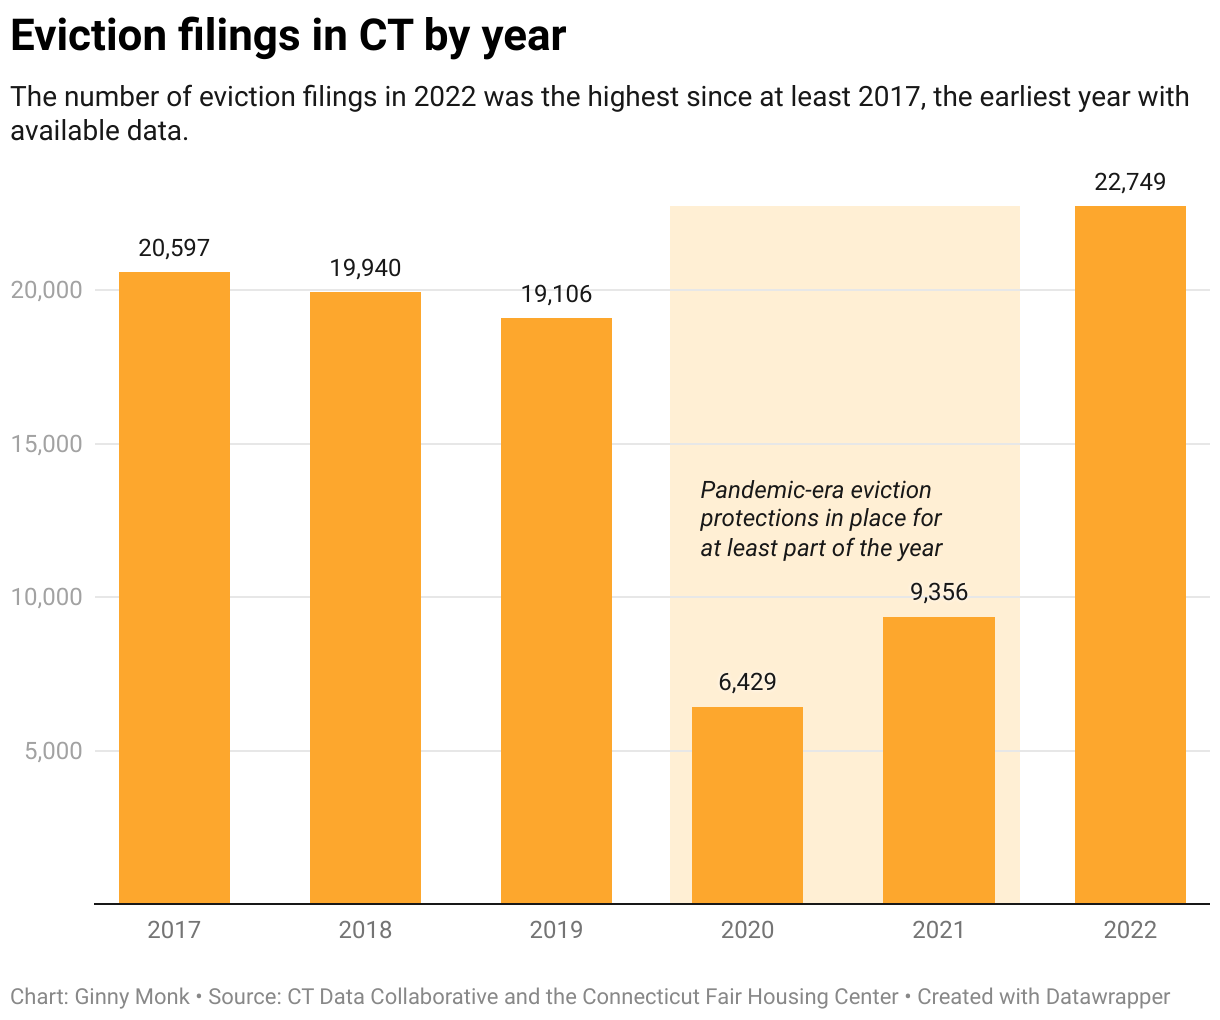 This column chart shows the number of eviction filings by year from 2017 to 2022. 